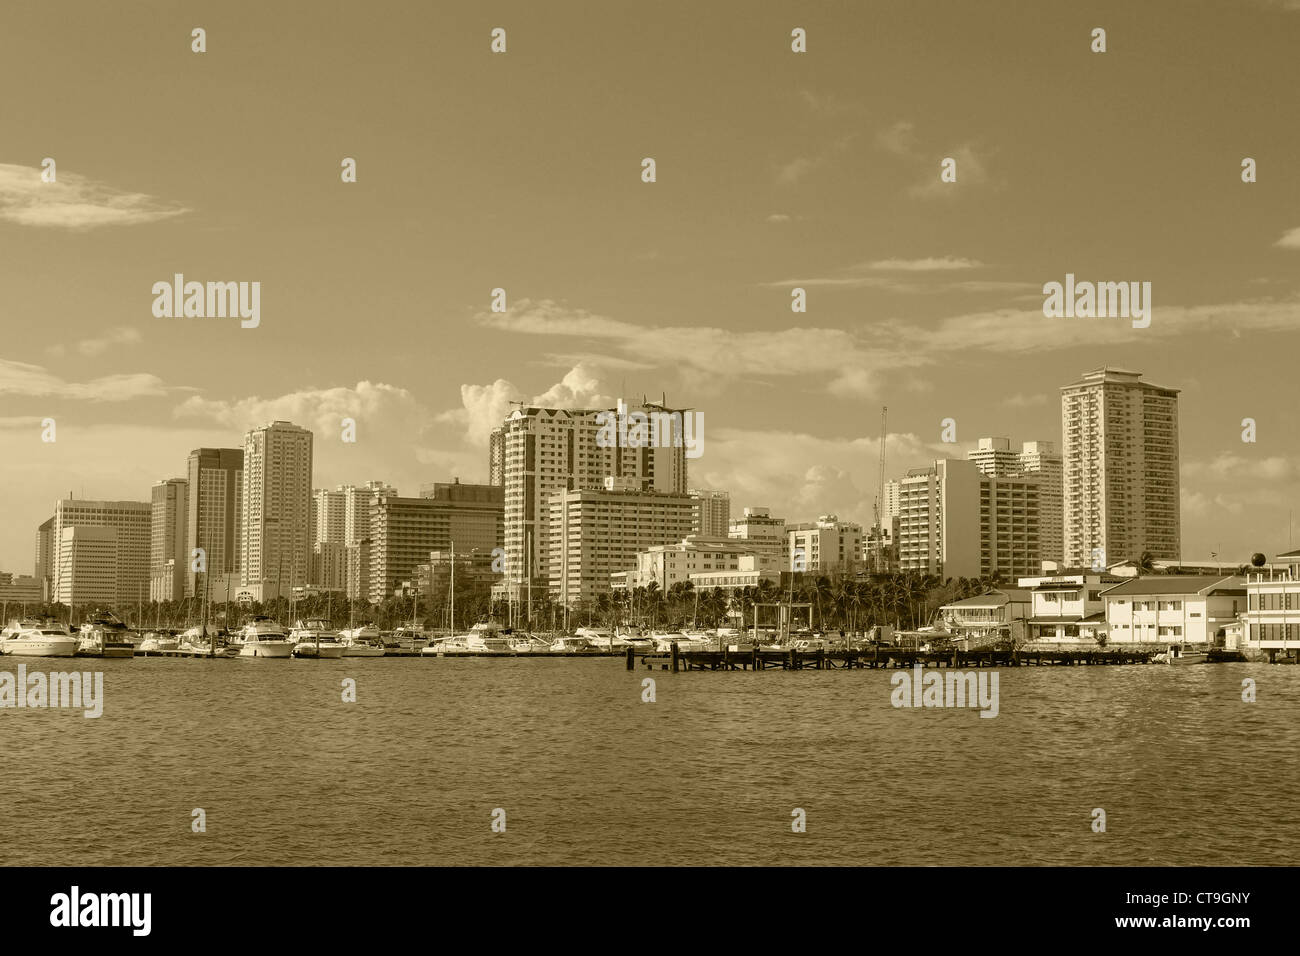 image of manila bay skyline during one hot afternoon. Stock Photo